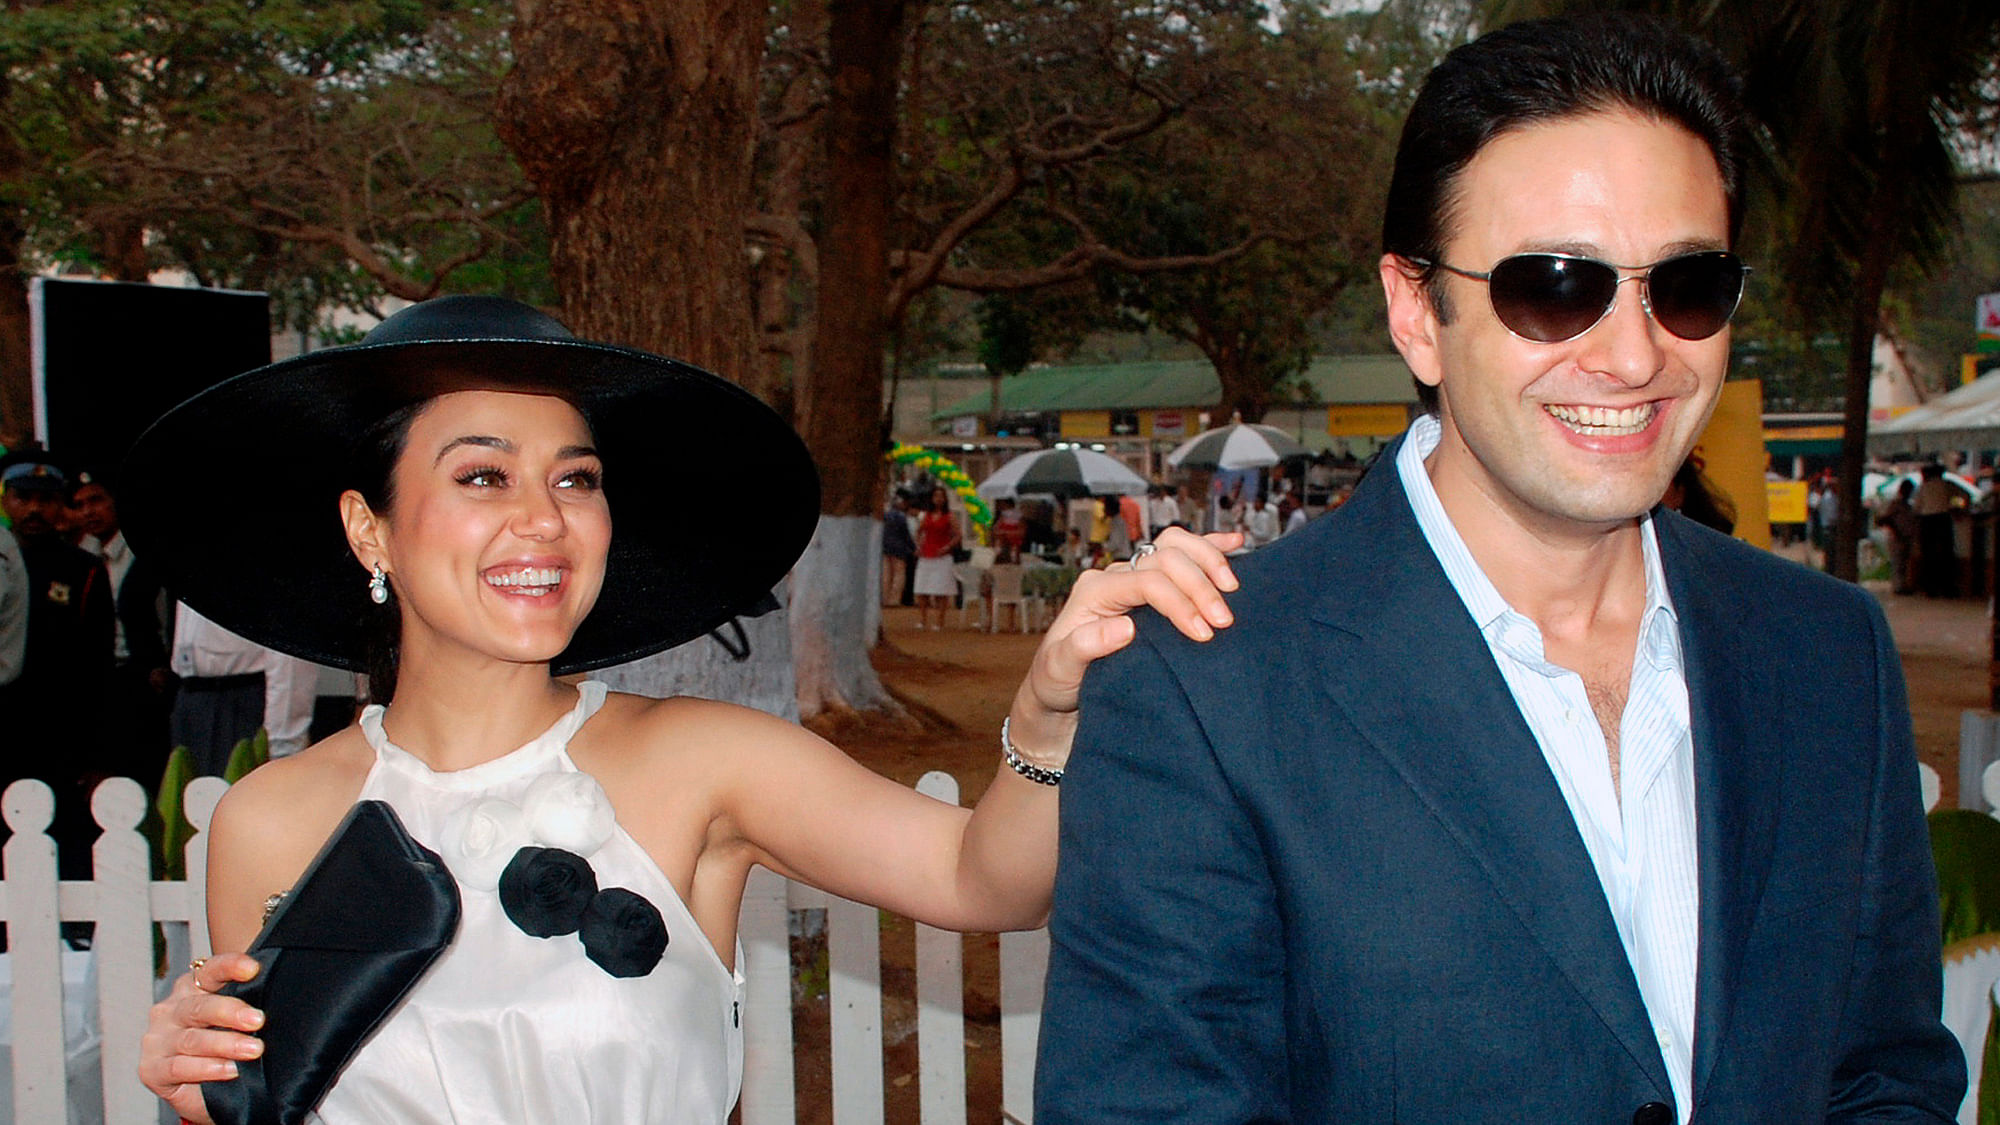 In June 2014, the actress had lodged a complaint with accusing Wadia of molesting and intimidating her at the Wankhede stadium on May 30 that year during a match of the Indian Premier League (Photo: Reuters)